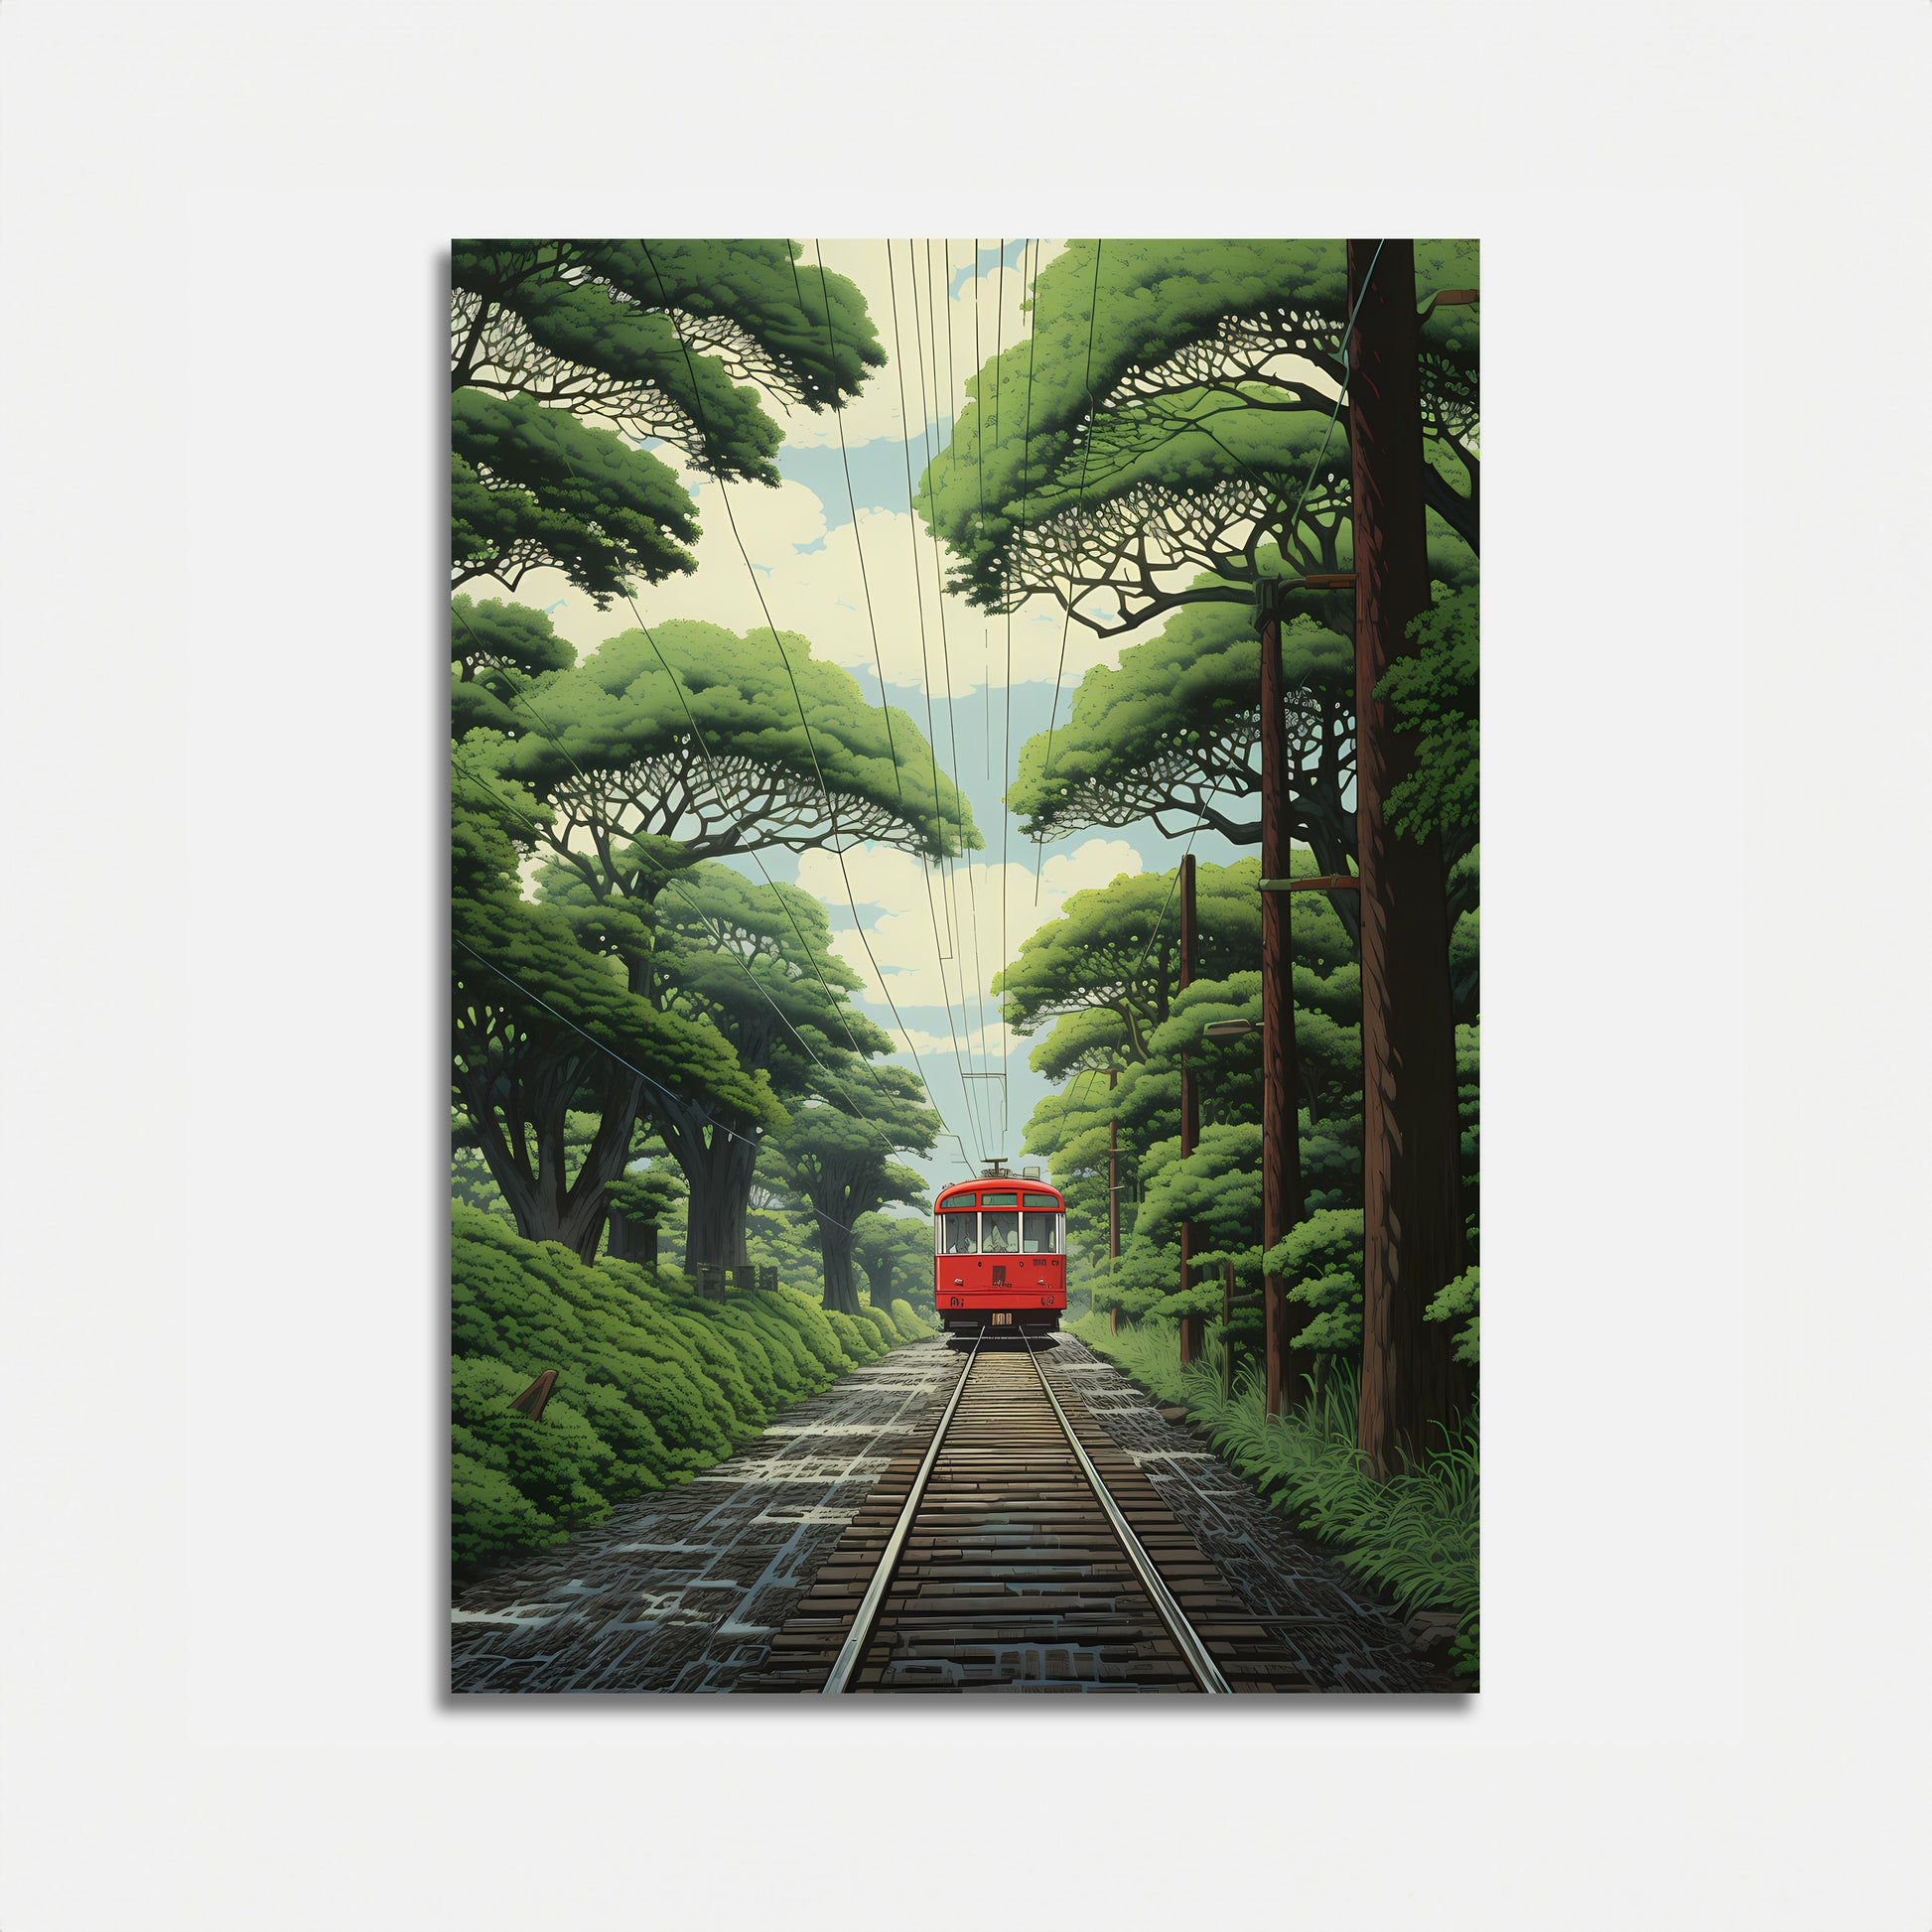 A stylized illustration of a red tram on train tracks through a green, tree-lined landscape.